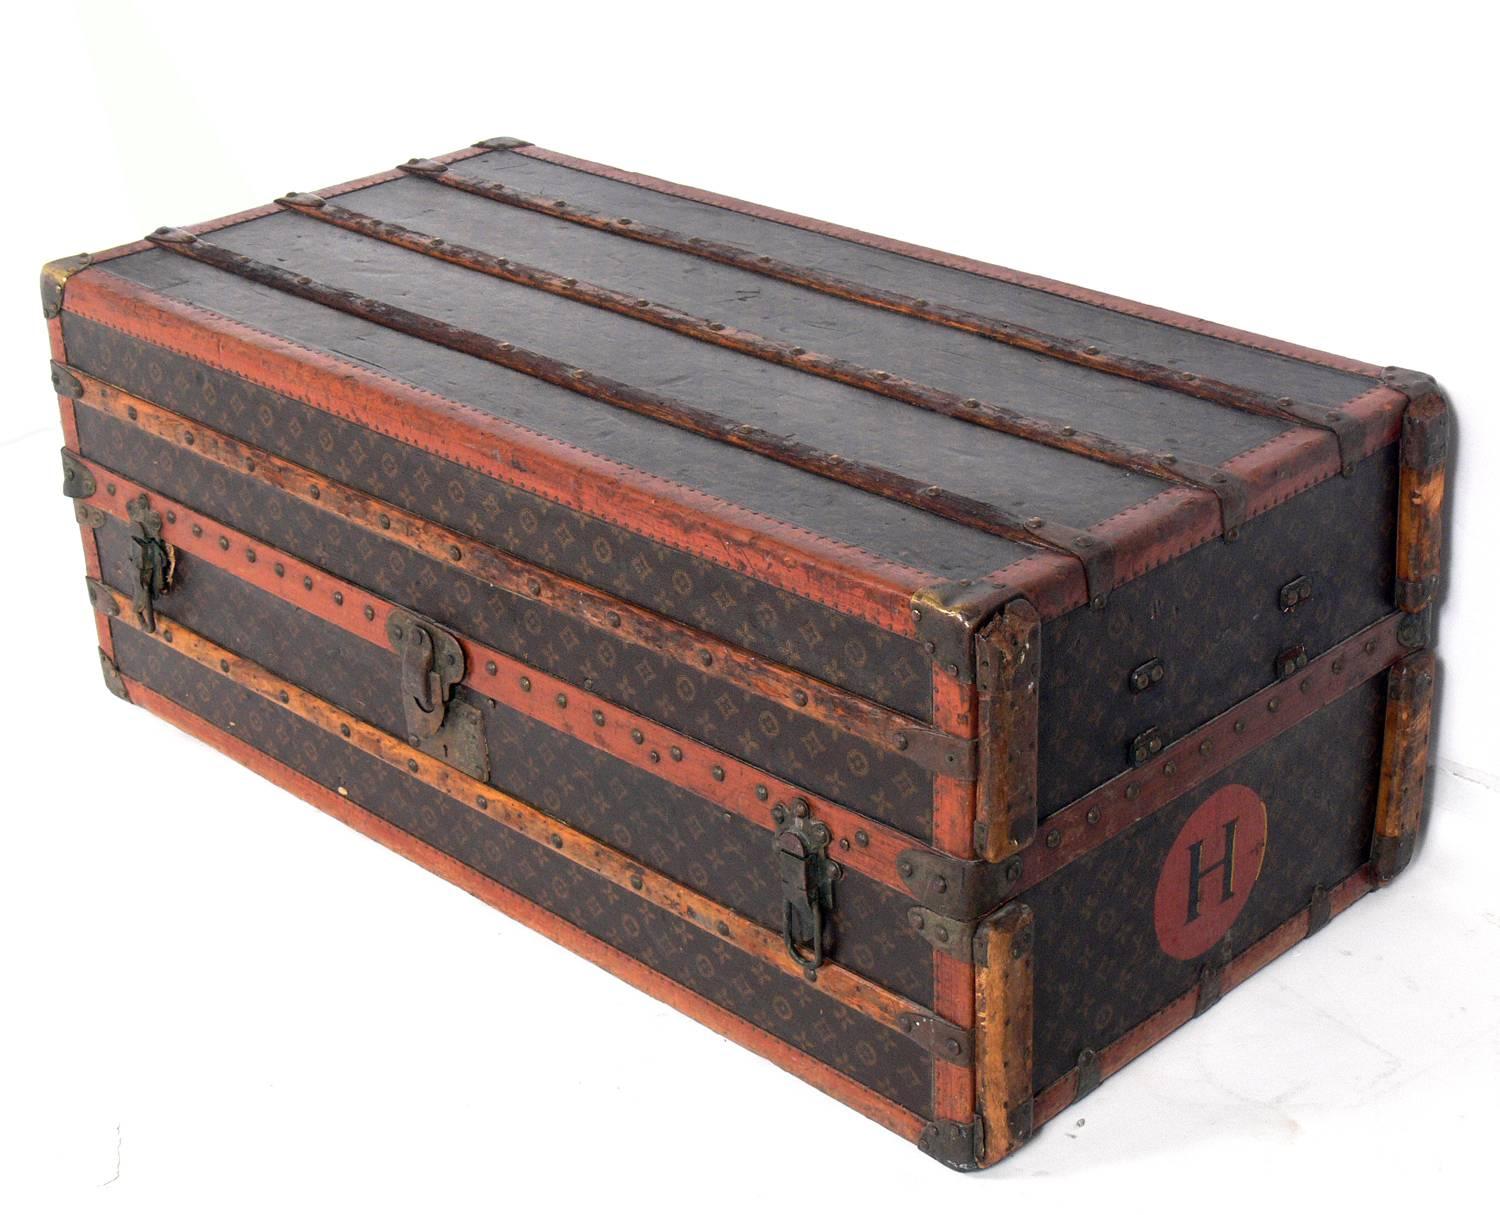 Louis Vuitton wardrobe trunk, Paris, France, circa 1930s or earlier. It is executed in the L. V. ‘Monogramme’ canvas, trimmed in brass, wood, and leather. Signed with original Vuitton impressed marks and labels throughout. The trunk retains it's